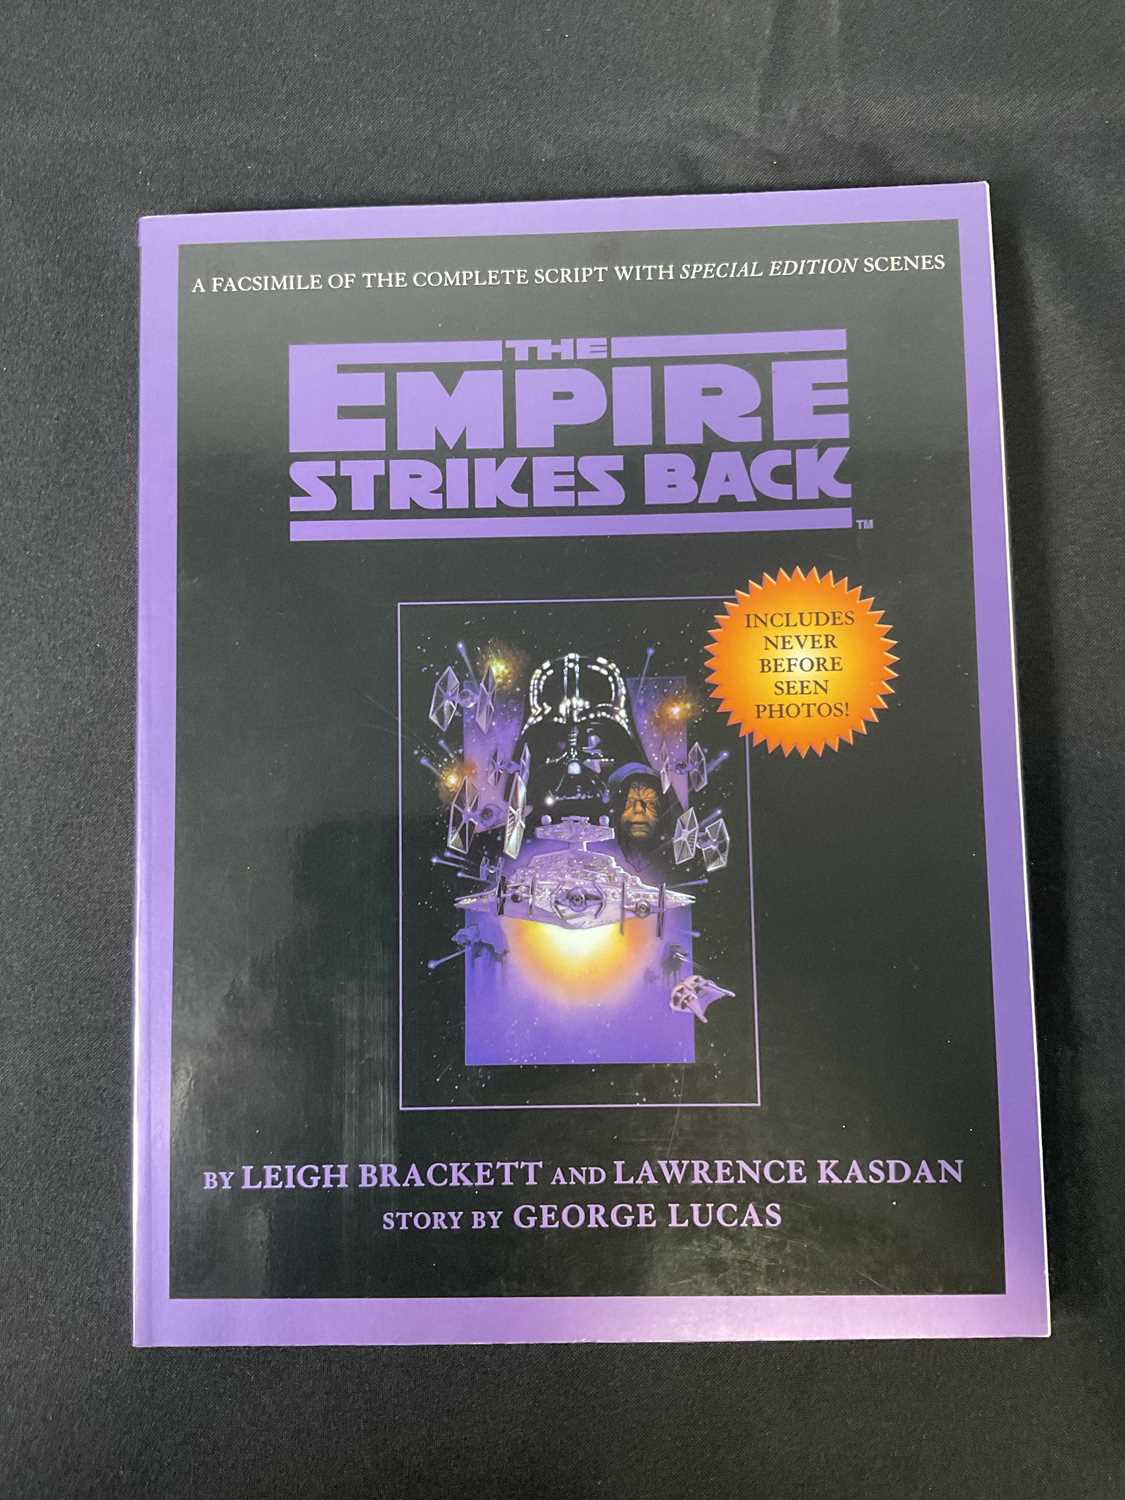 STAR WARS EPISODE V - THE EMPIRE STRIKES BACK 1st edition facsimile script (1998) signed by MARK - Image 4 of 4